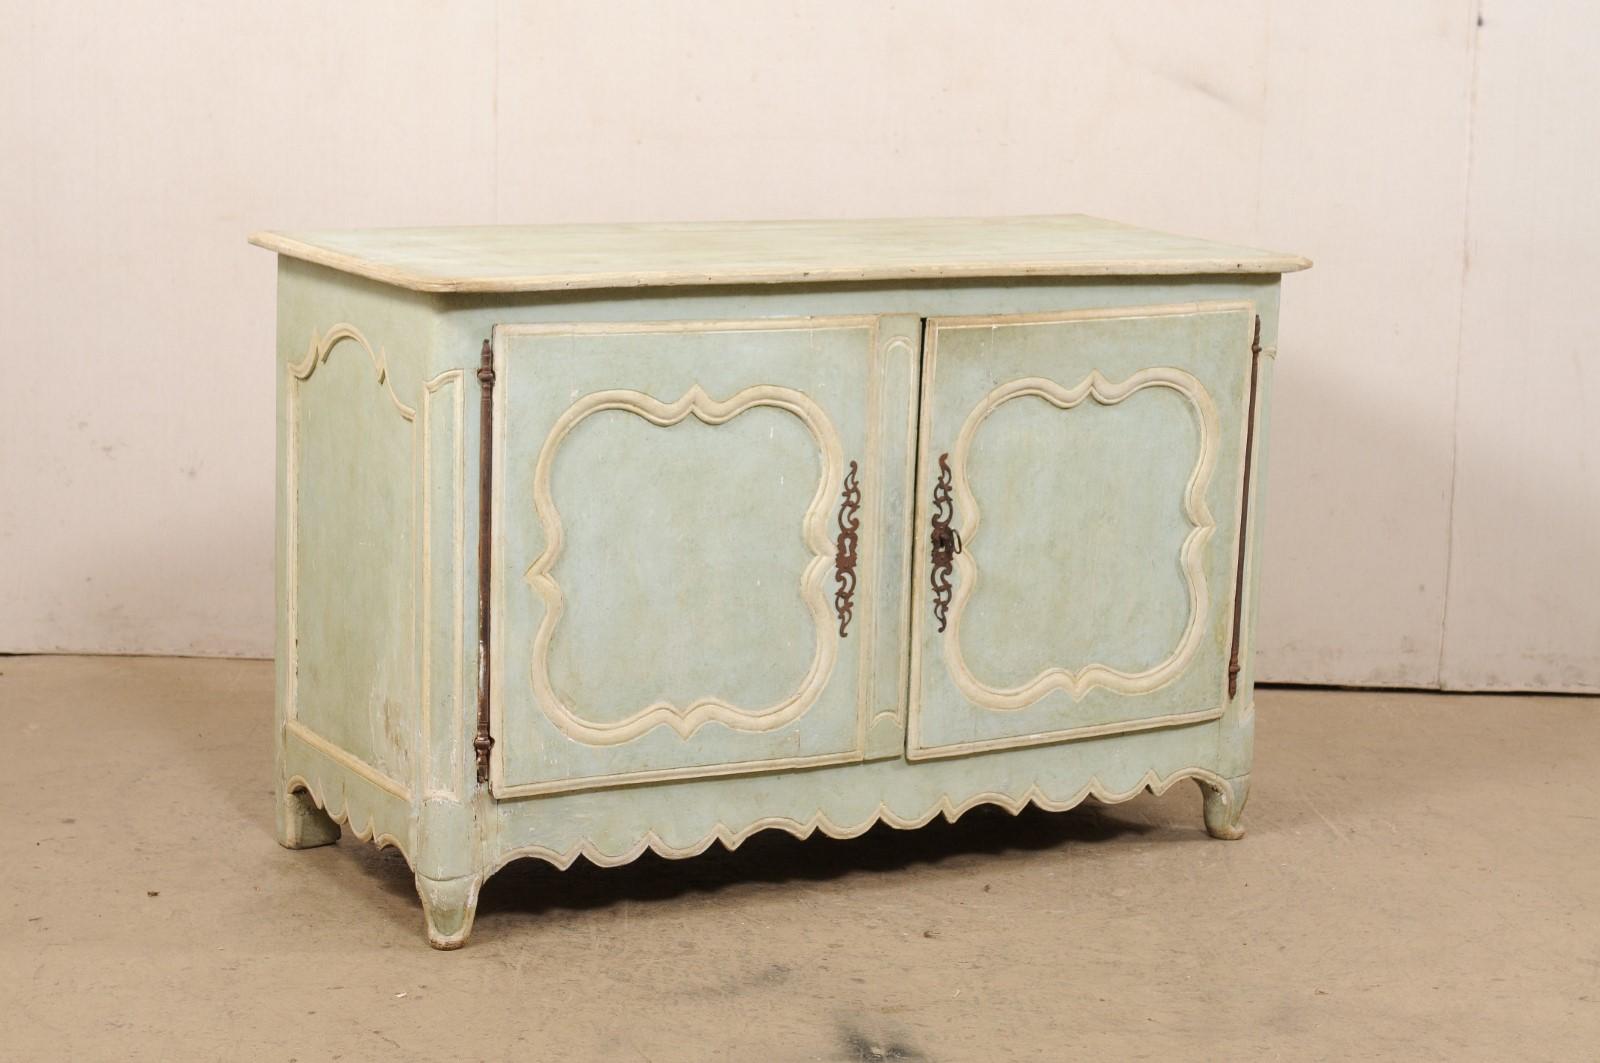 A French painted wood two-door buffet cabinet from the 18th century. This antique cabinet from France has a rectangular-shaped top with rounded front corner edges, which rests above a case of fitted with a pair of decoratively-carved recessed-panel